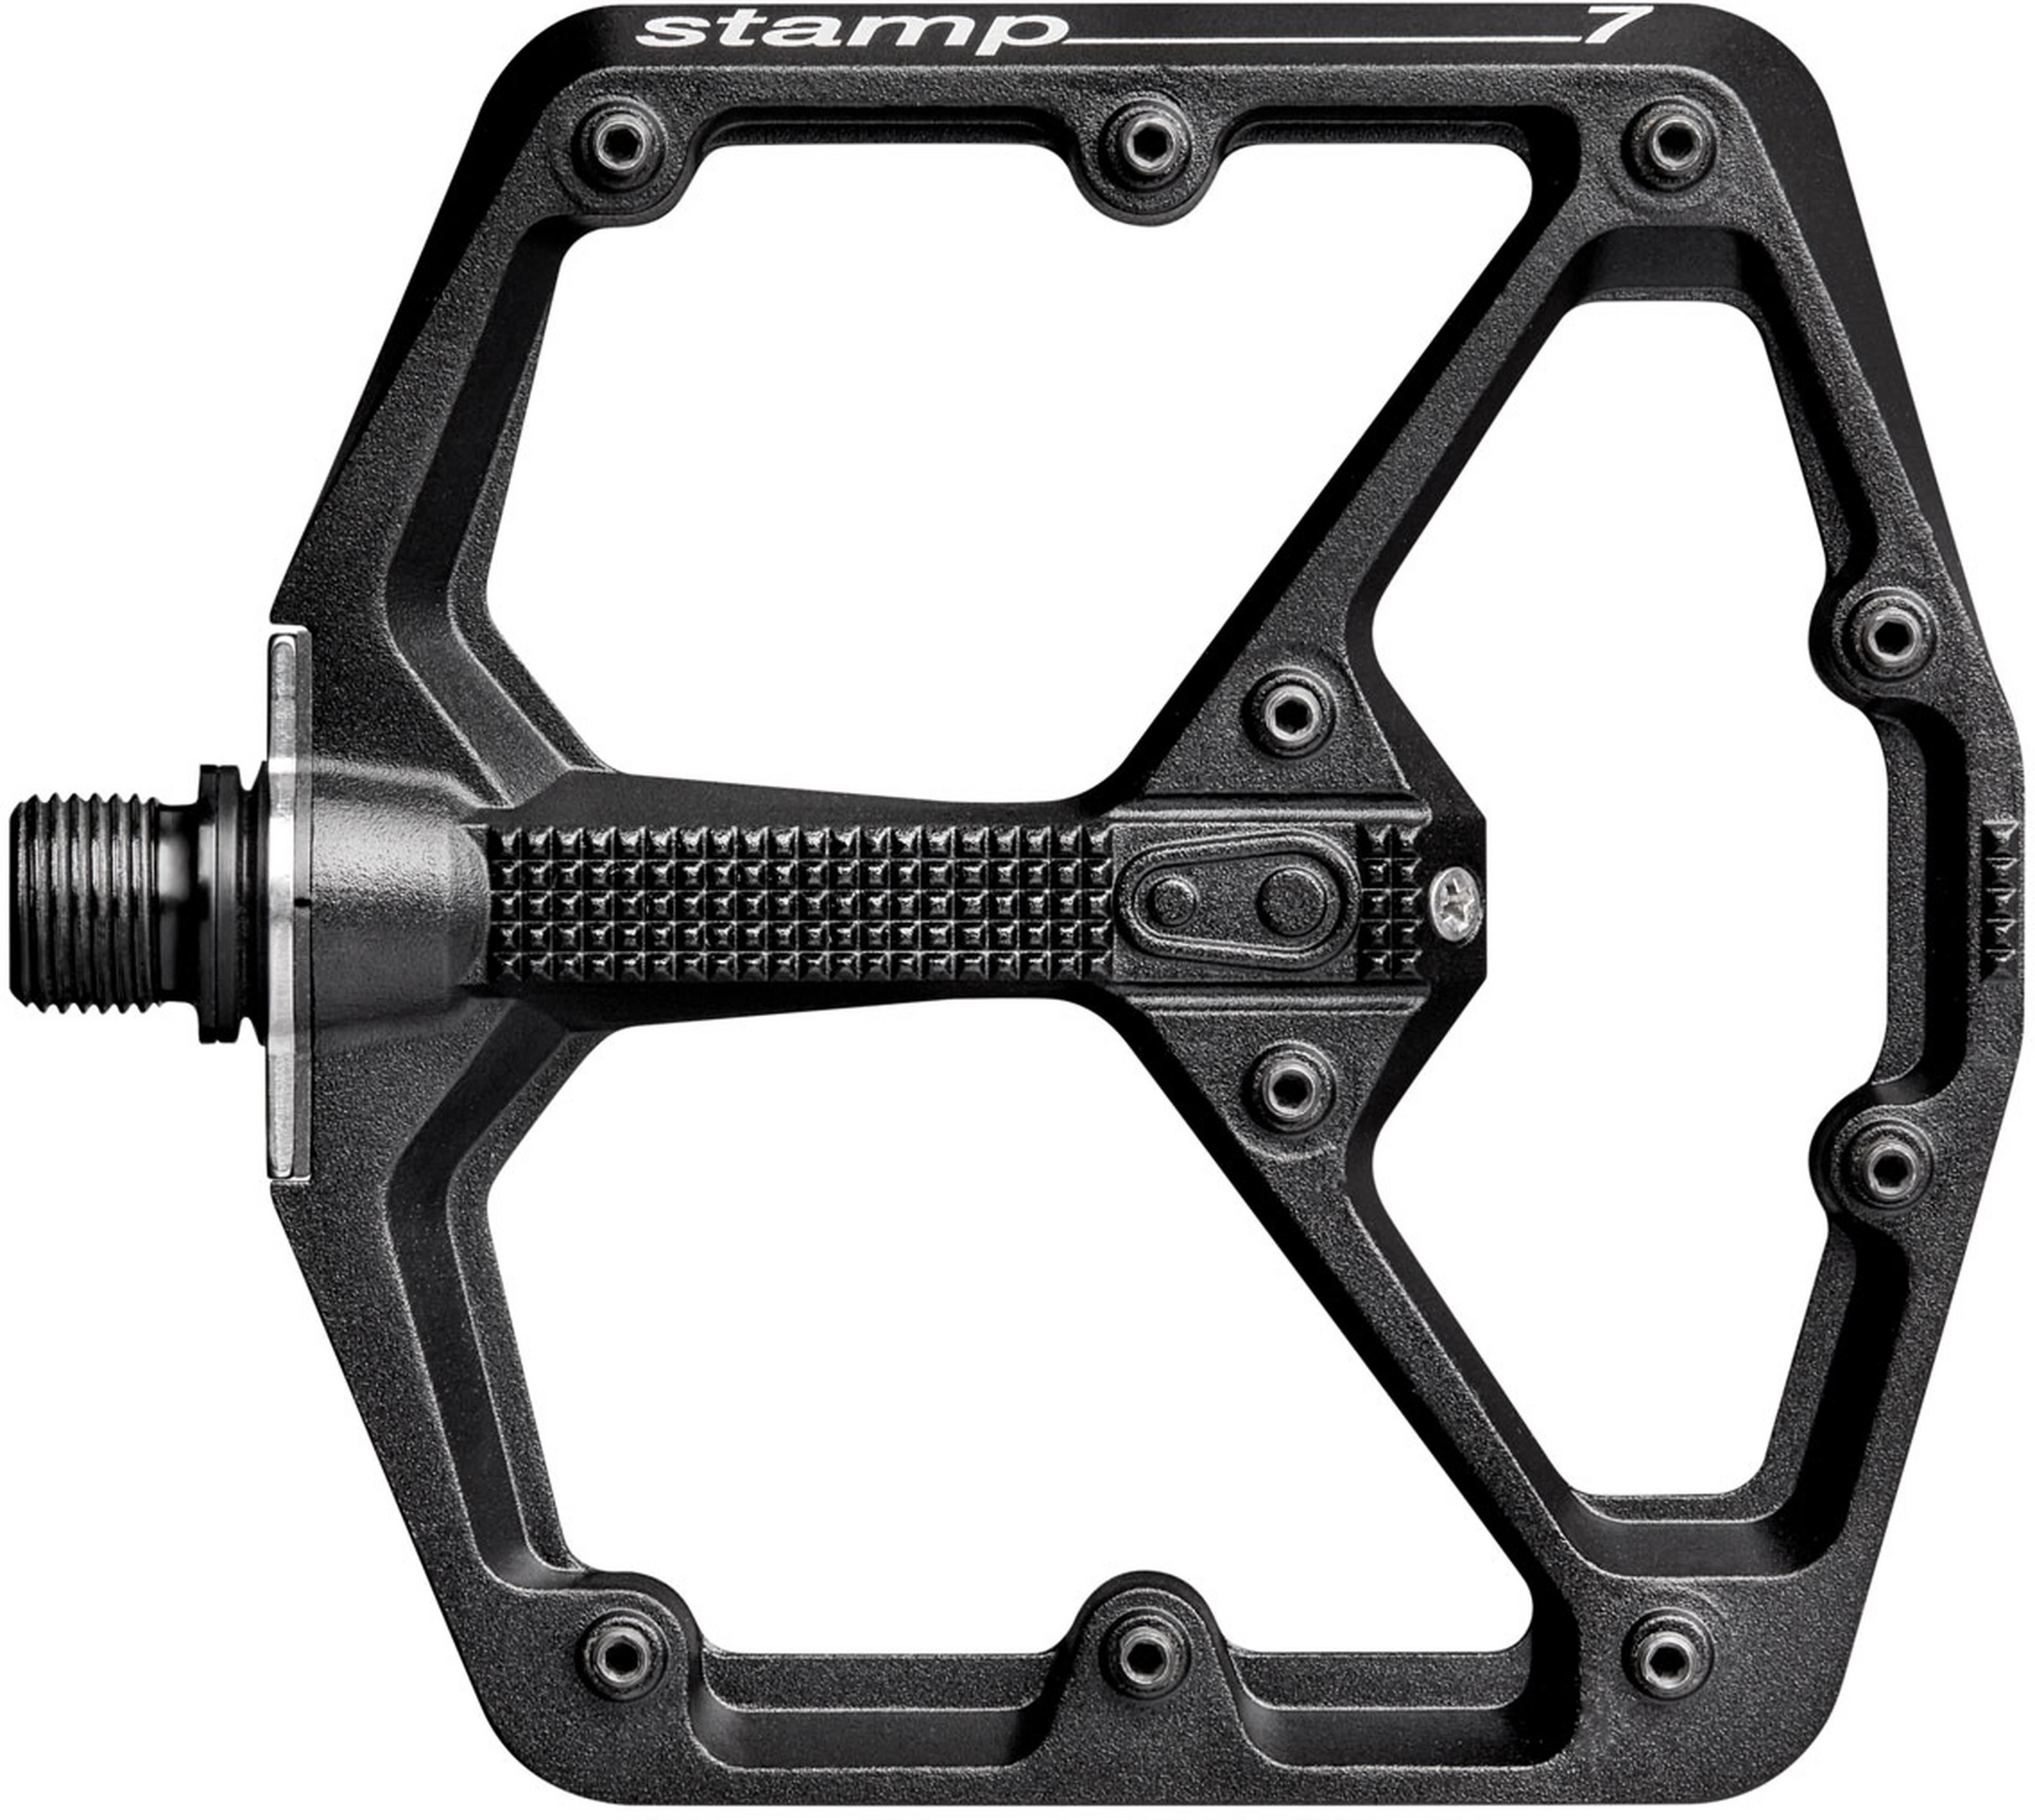 crankbrothers Stamp 7 Pedals | Wiggle